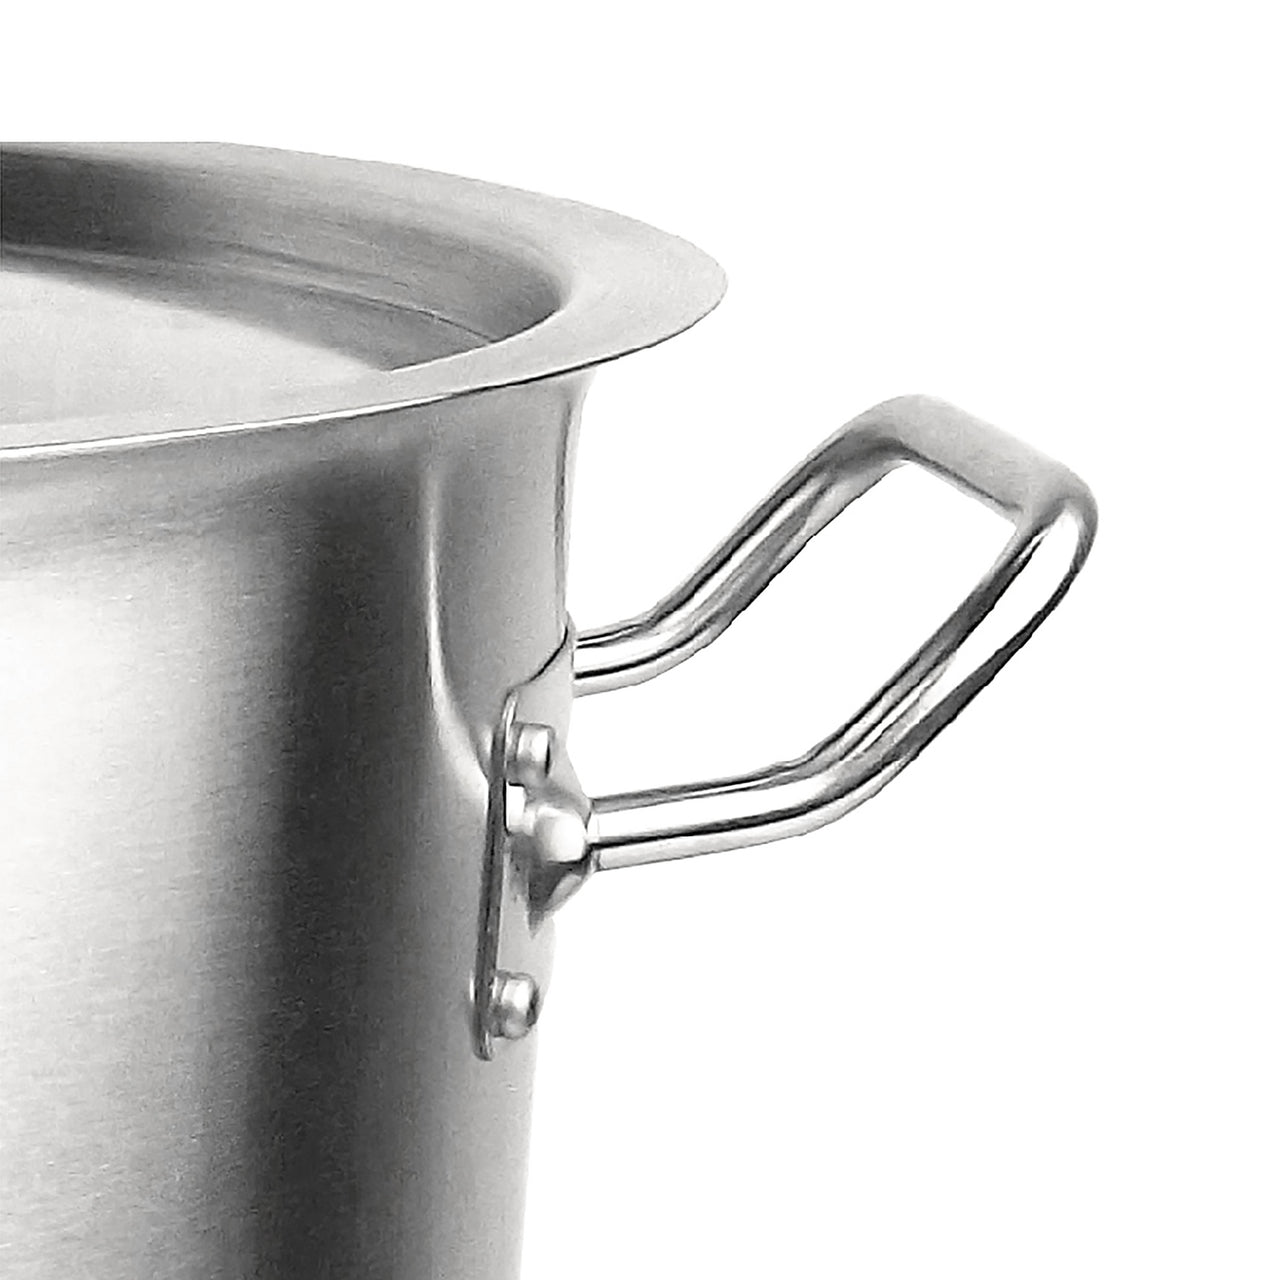 Silver Stainless Steel Stock Pot with Lid